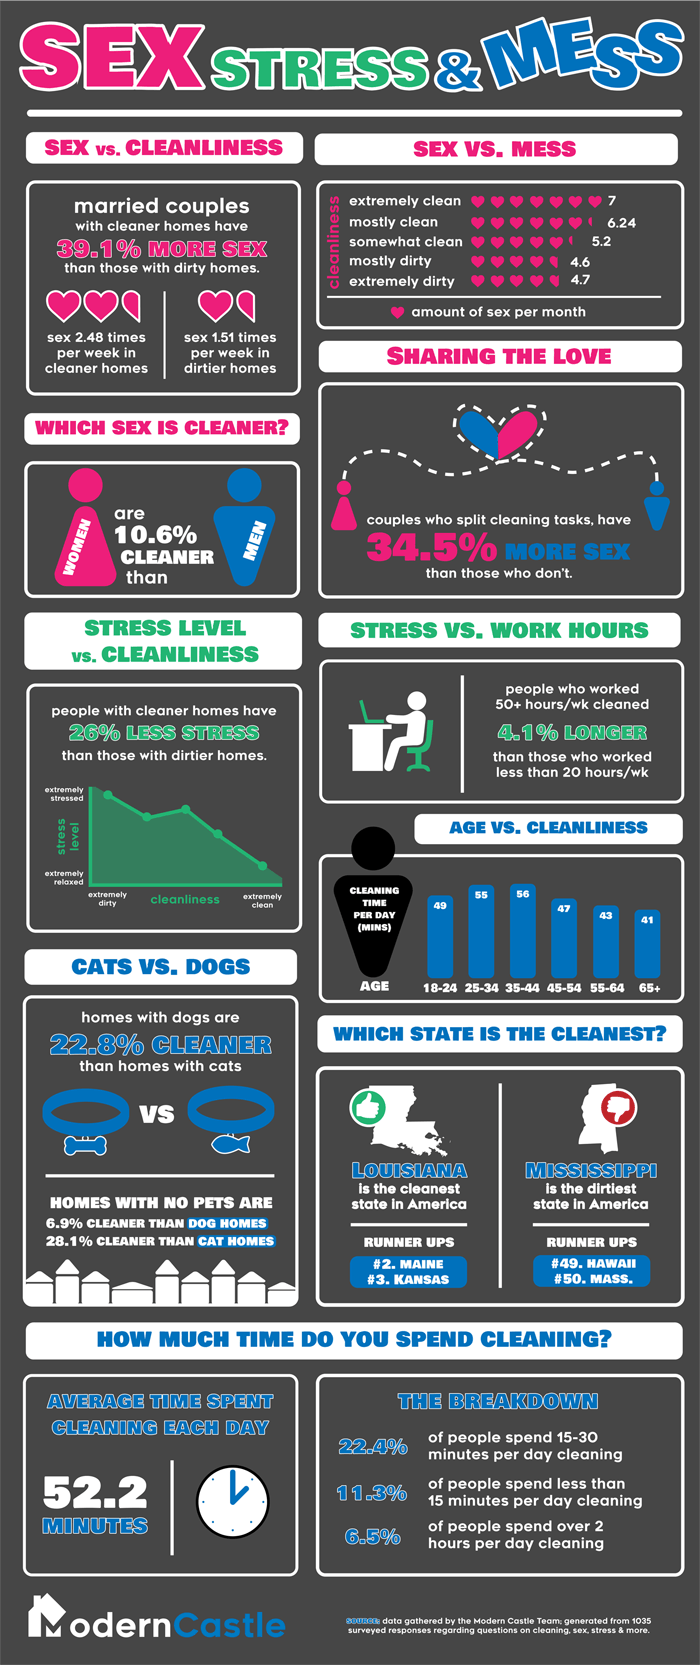 Cleaning Sex Stress Infographic